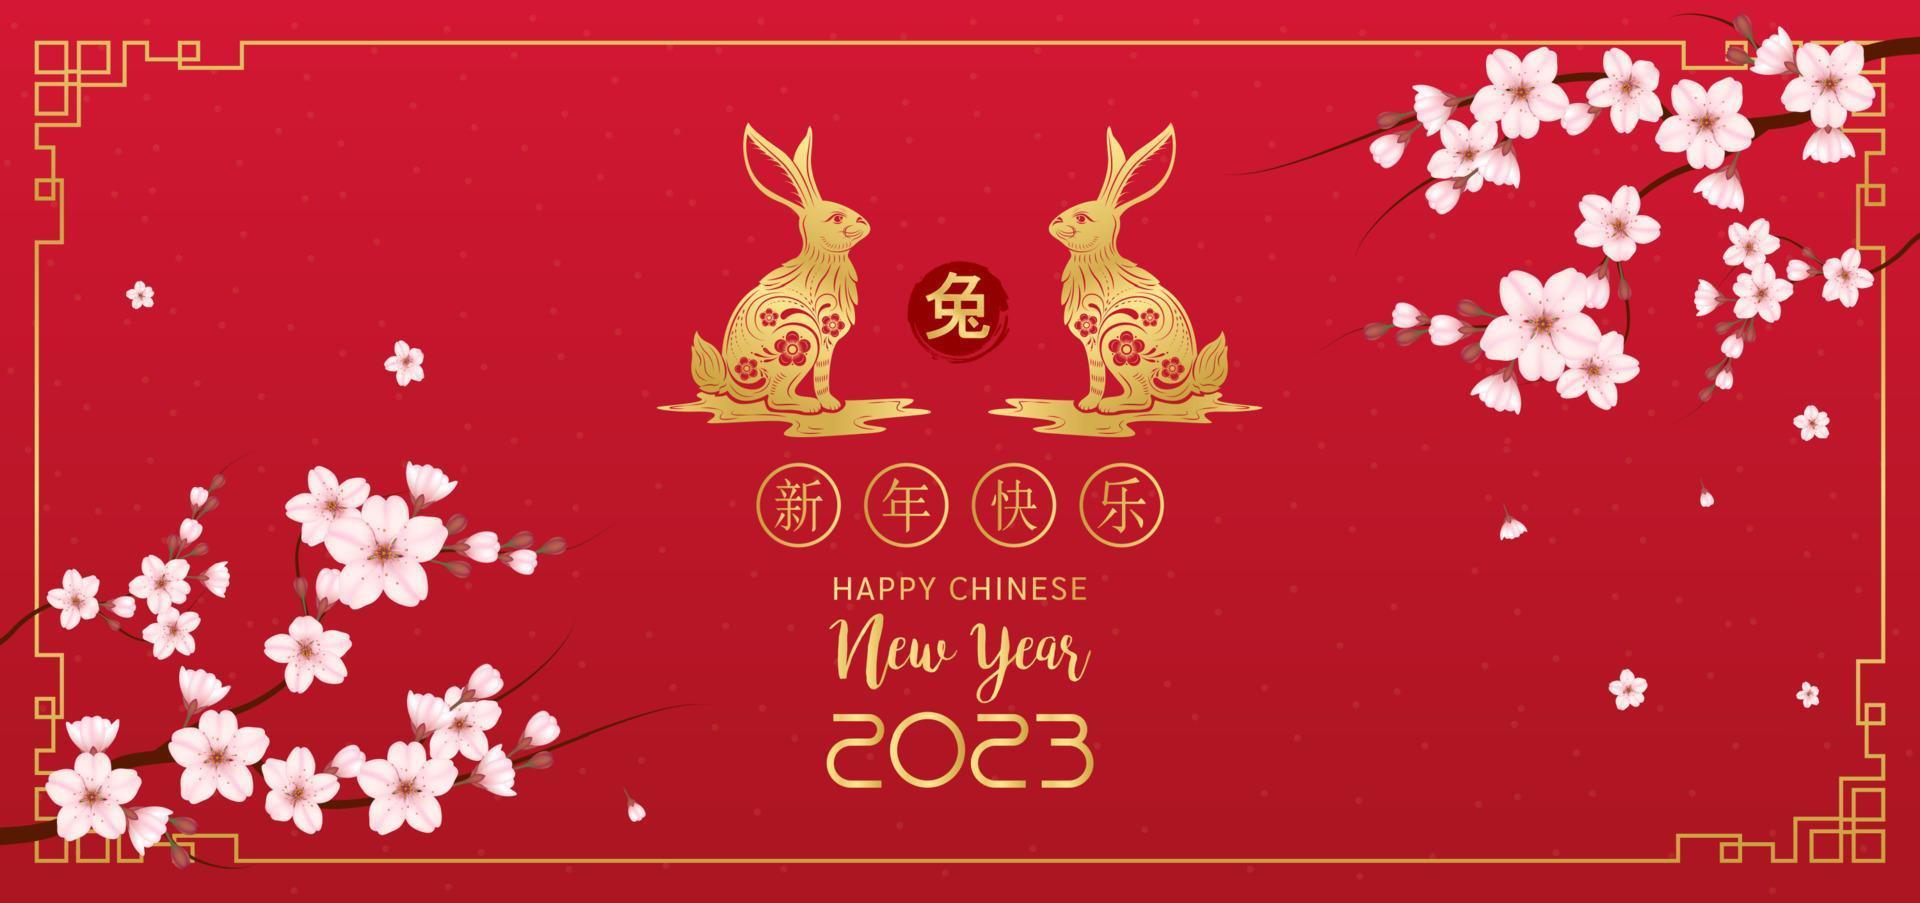 Card happy Chinese New Year 2023, Rabbit zodiac sign on red background. Elements with craft rabbit and sakura flower. Chinese Translation happy new year 2023, year of the Rabbit. Vector EPS10.